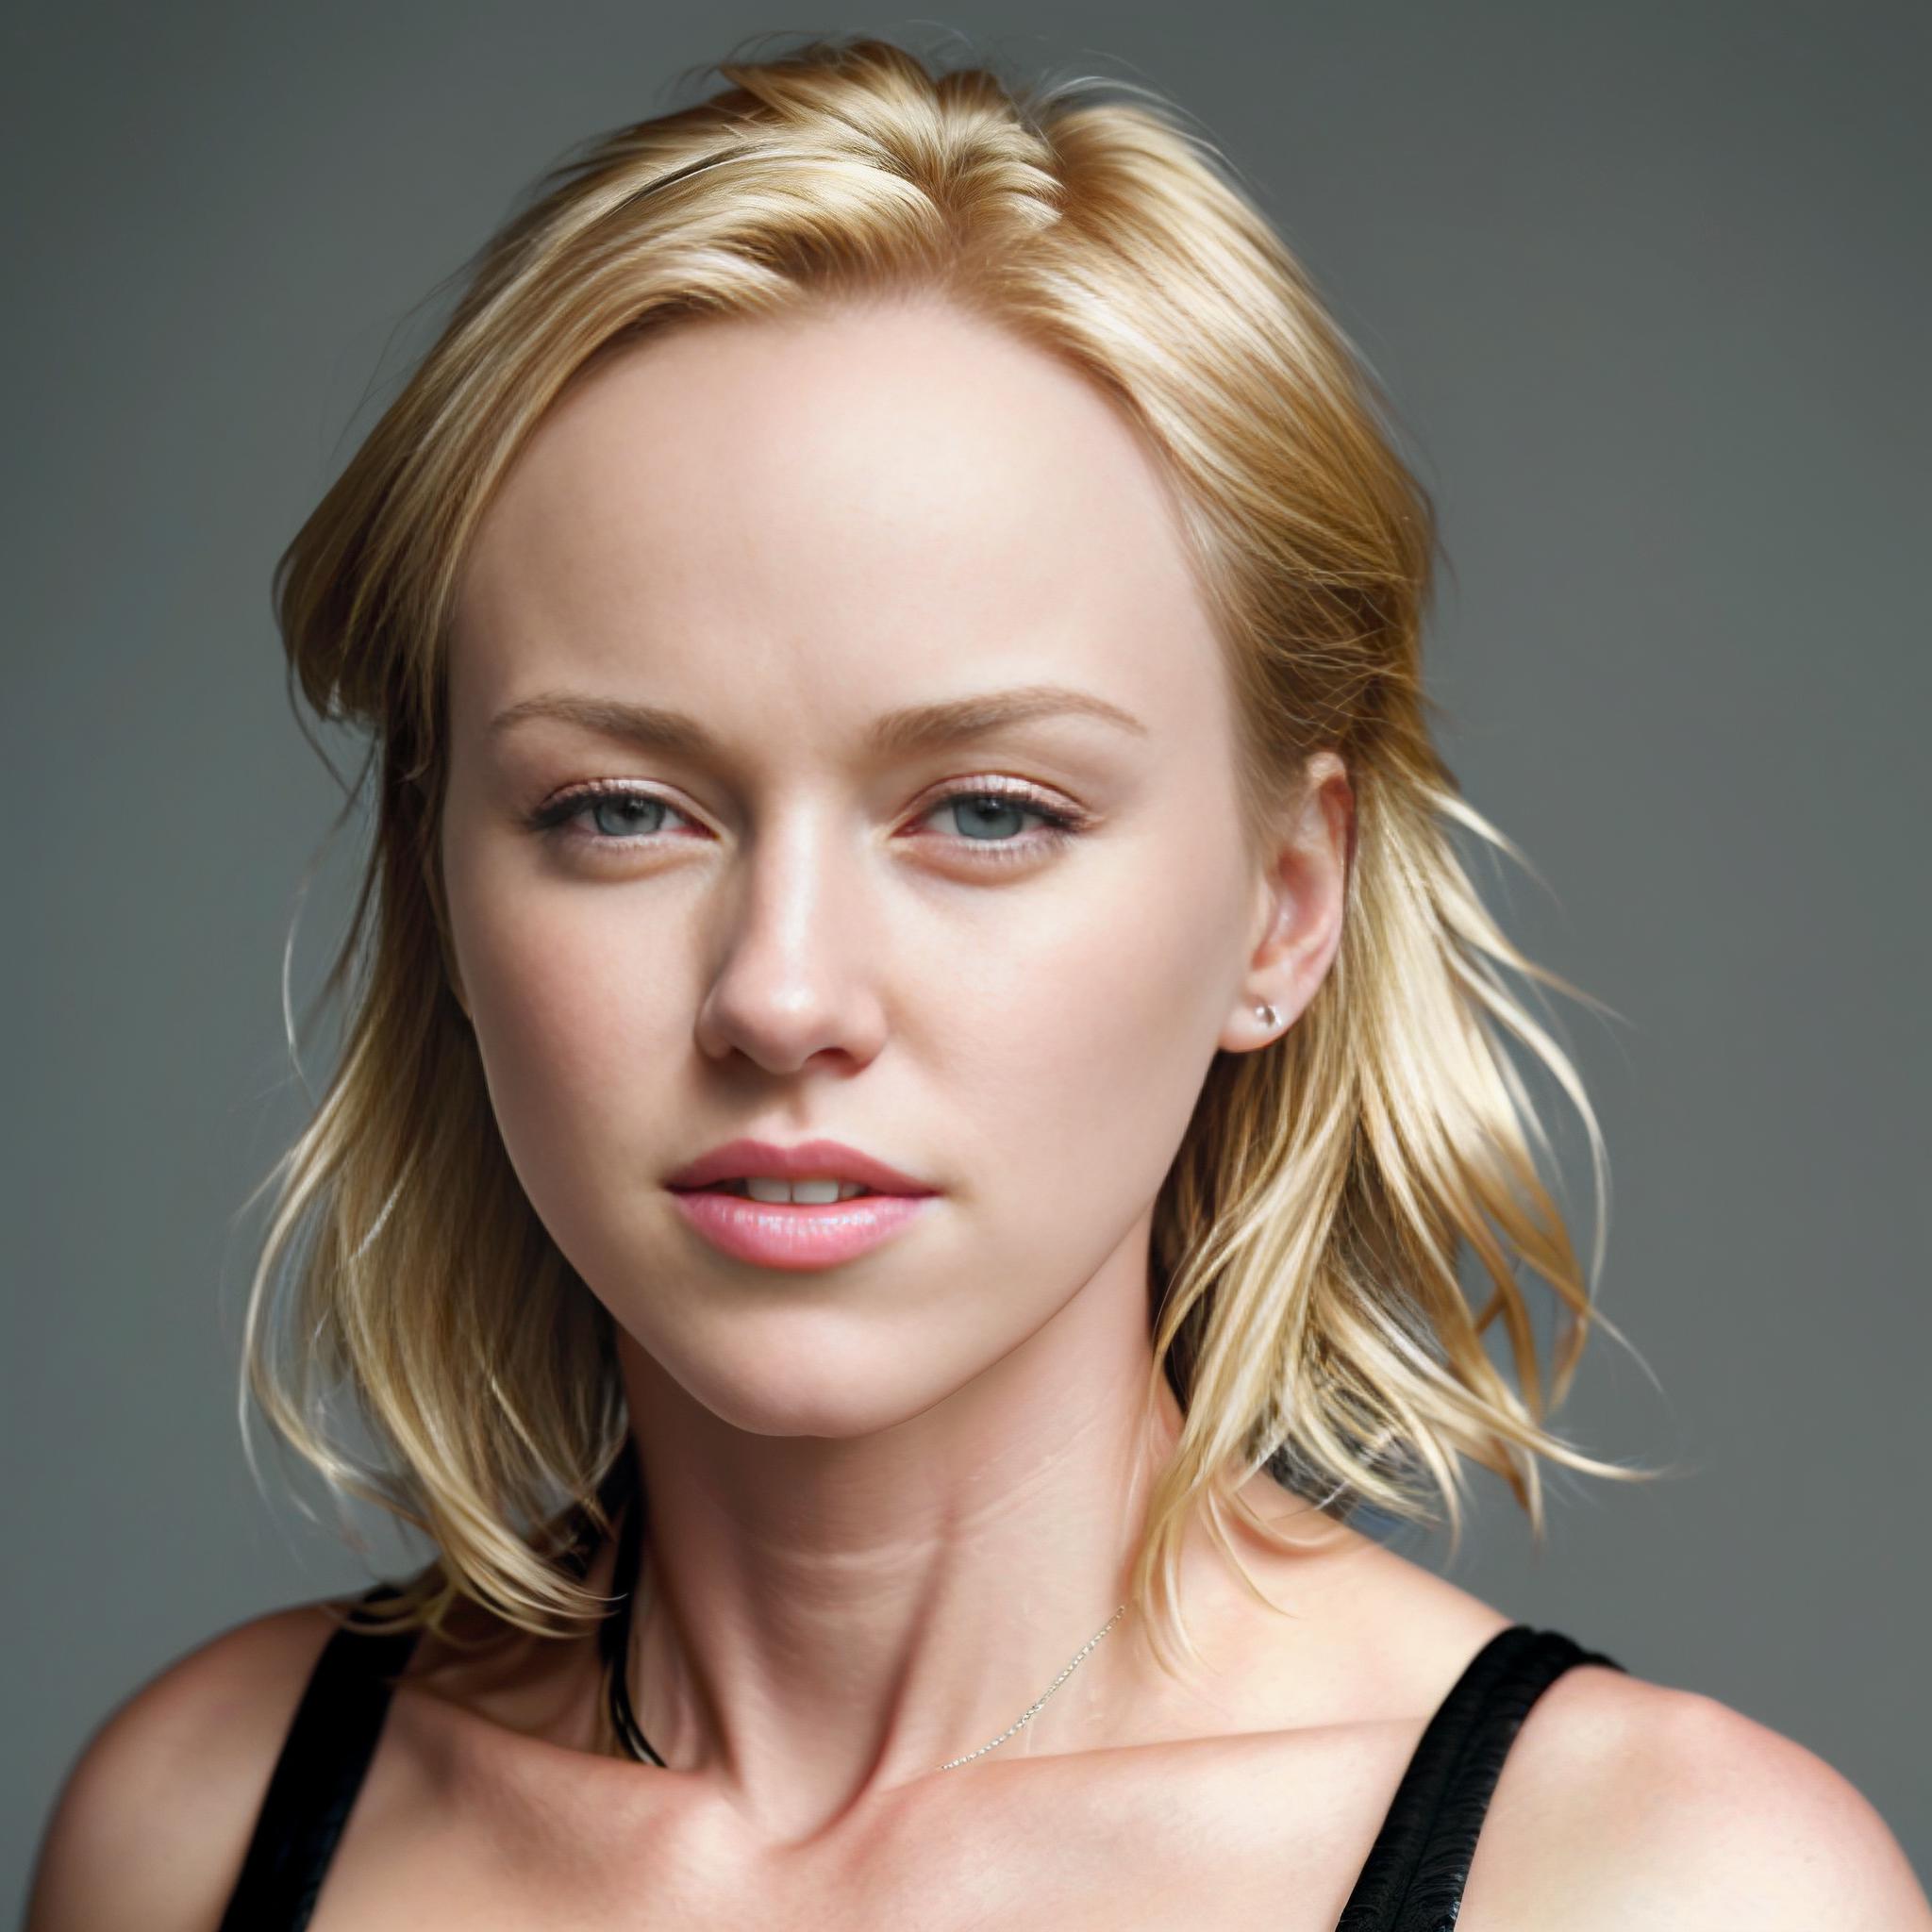 Naomi Watts (Actress) image by helicalink